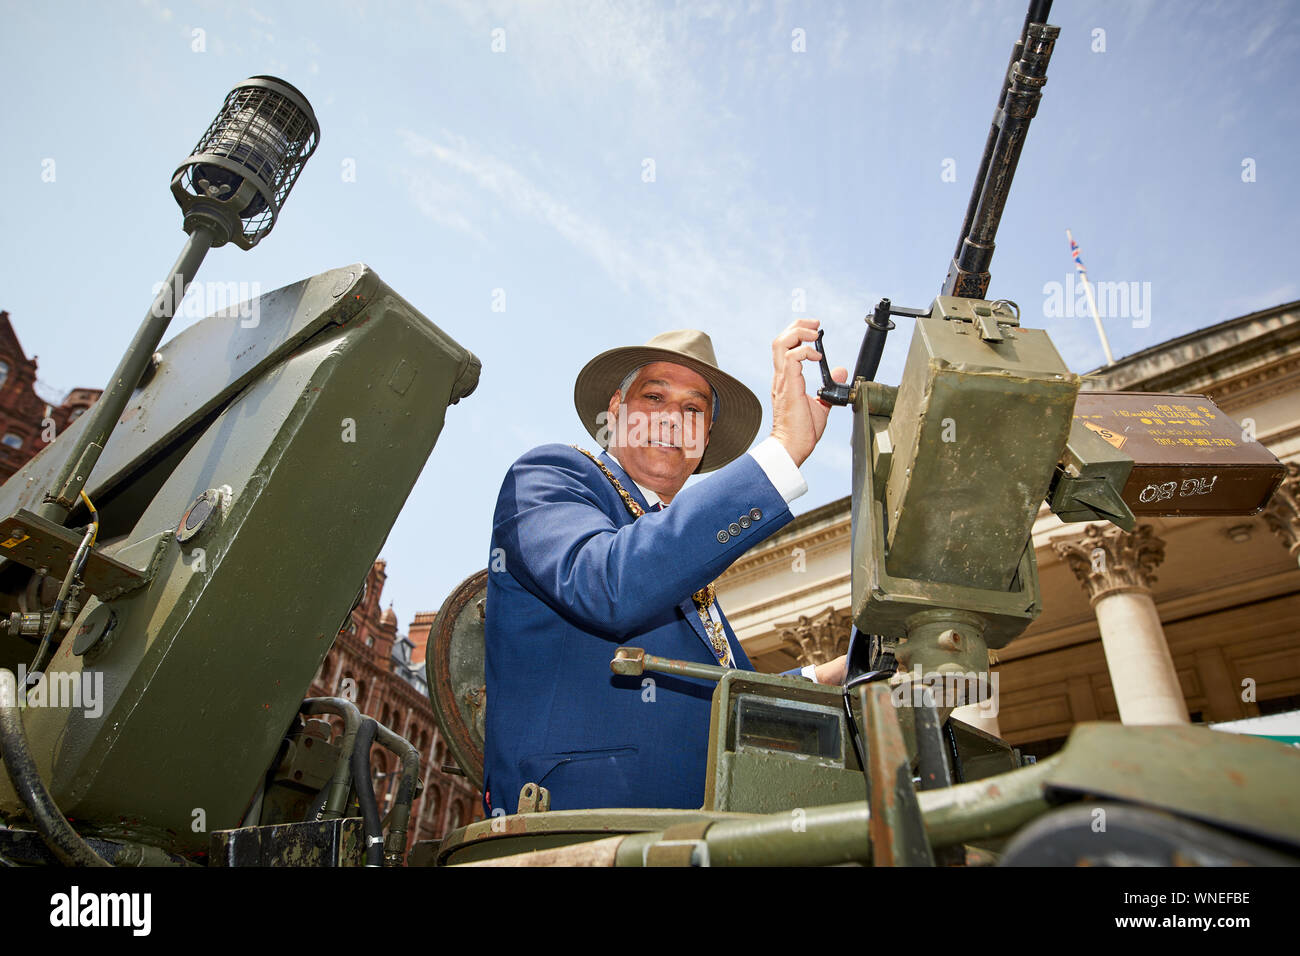 Manchester Armed Forces Day in St Peters Square  Lord mayor of Manchester Councillor Abid Latif Chohan at the gun of a tank Stock Photo